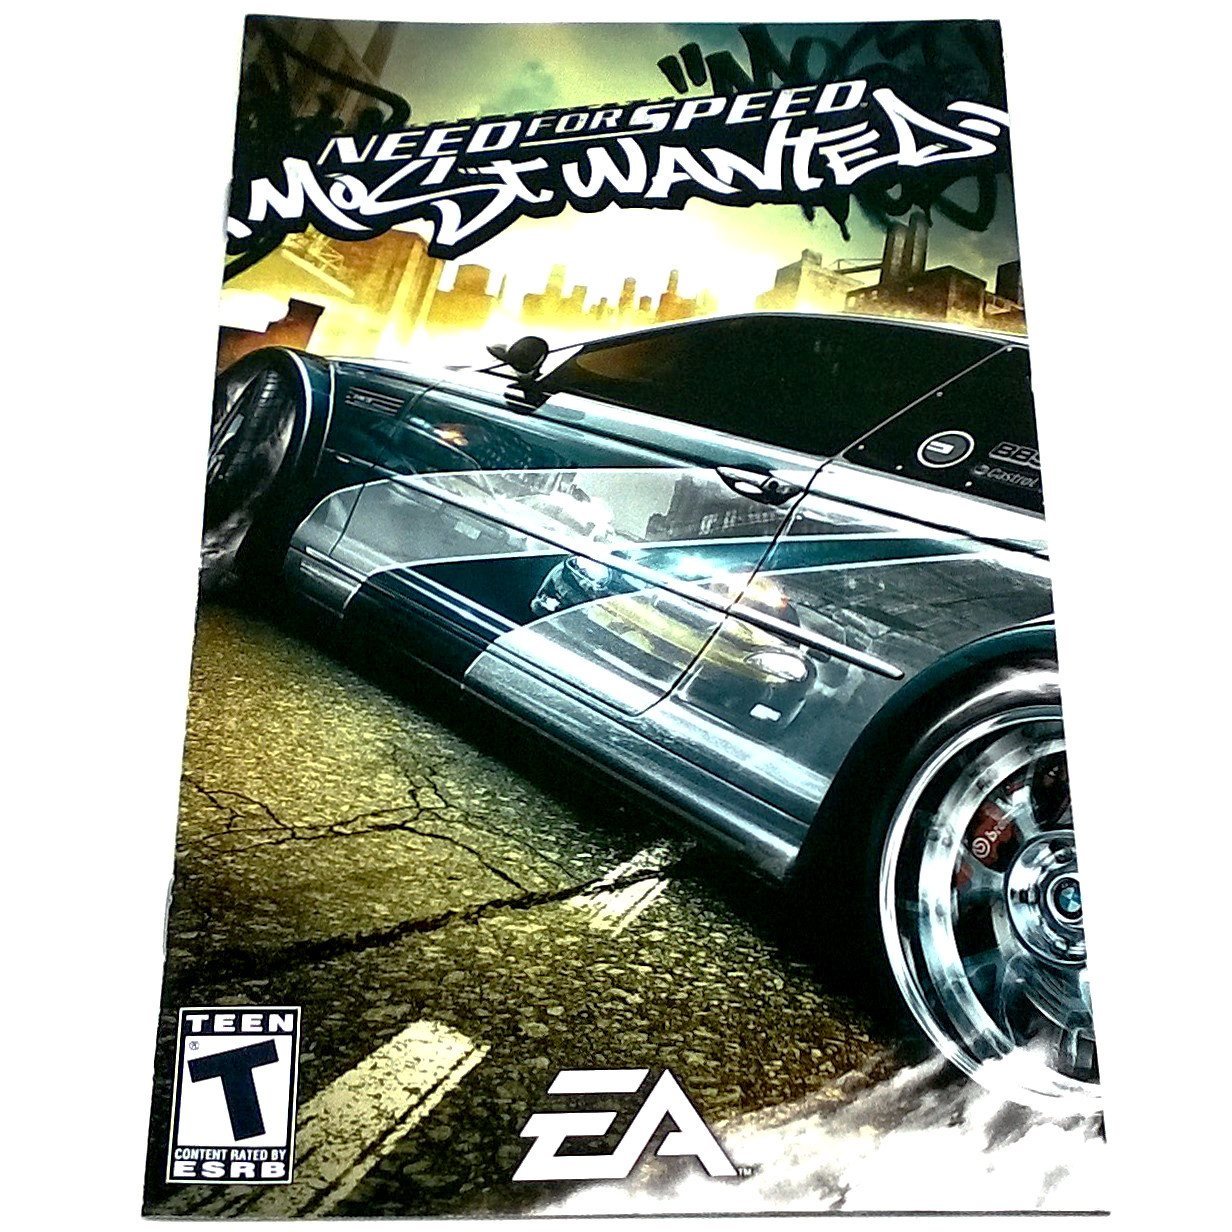 Need for Speed: Most Wanted for PlayStation 2 (PS2) | PJ's Games